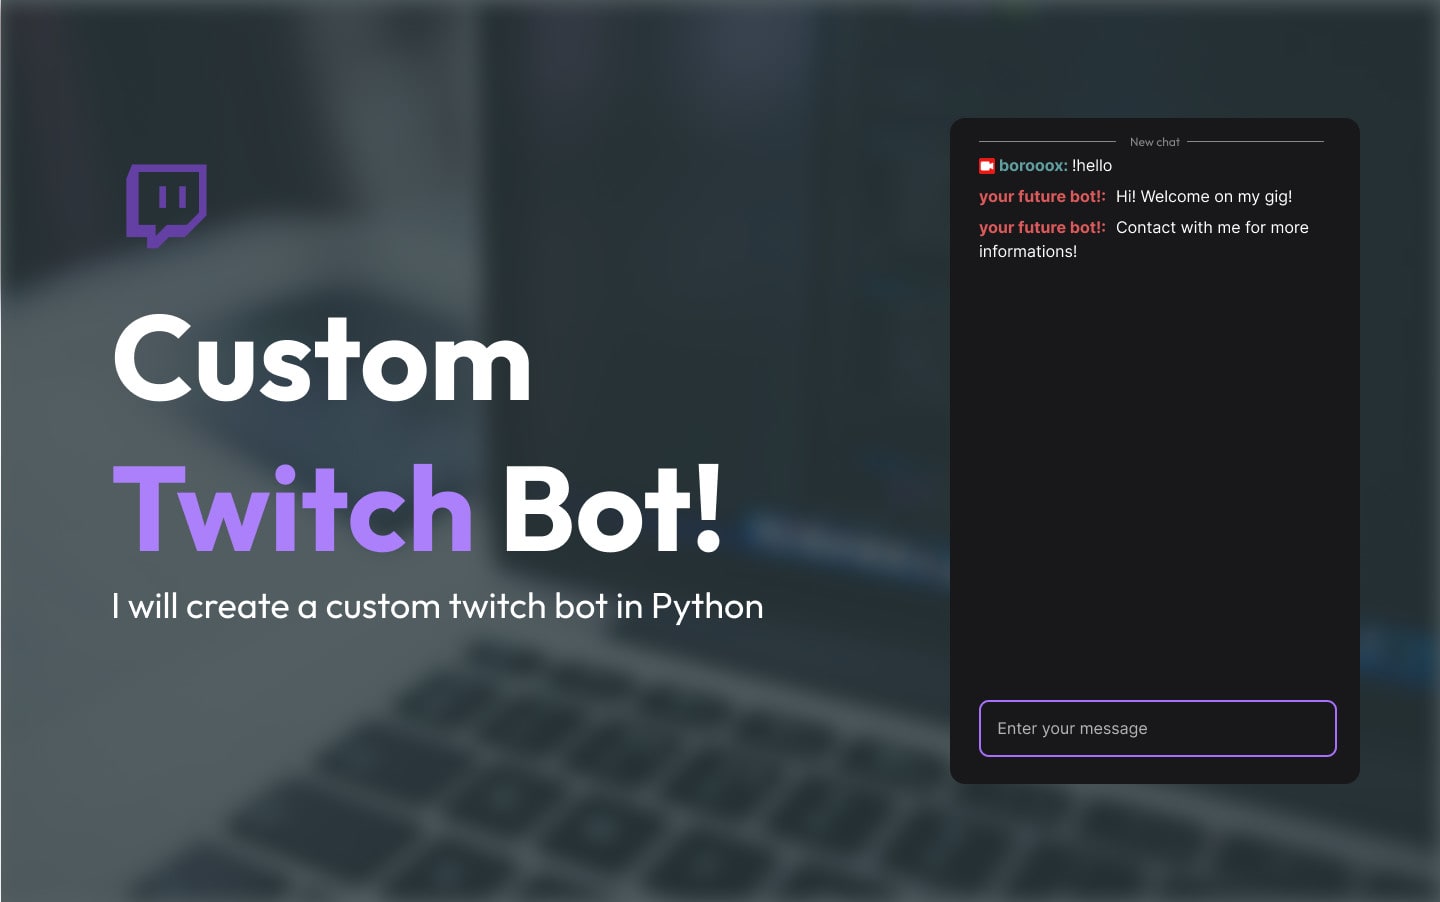 How To Make A Twitch Bot with Python!